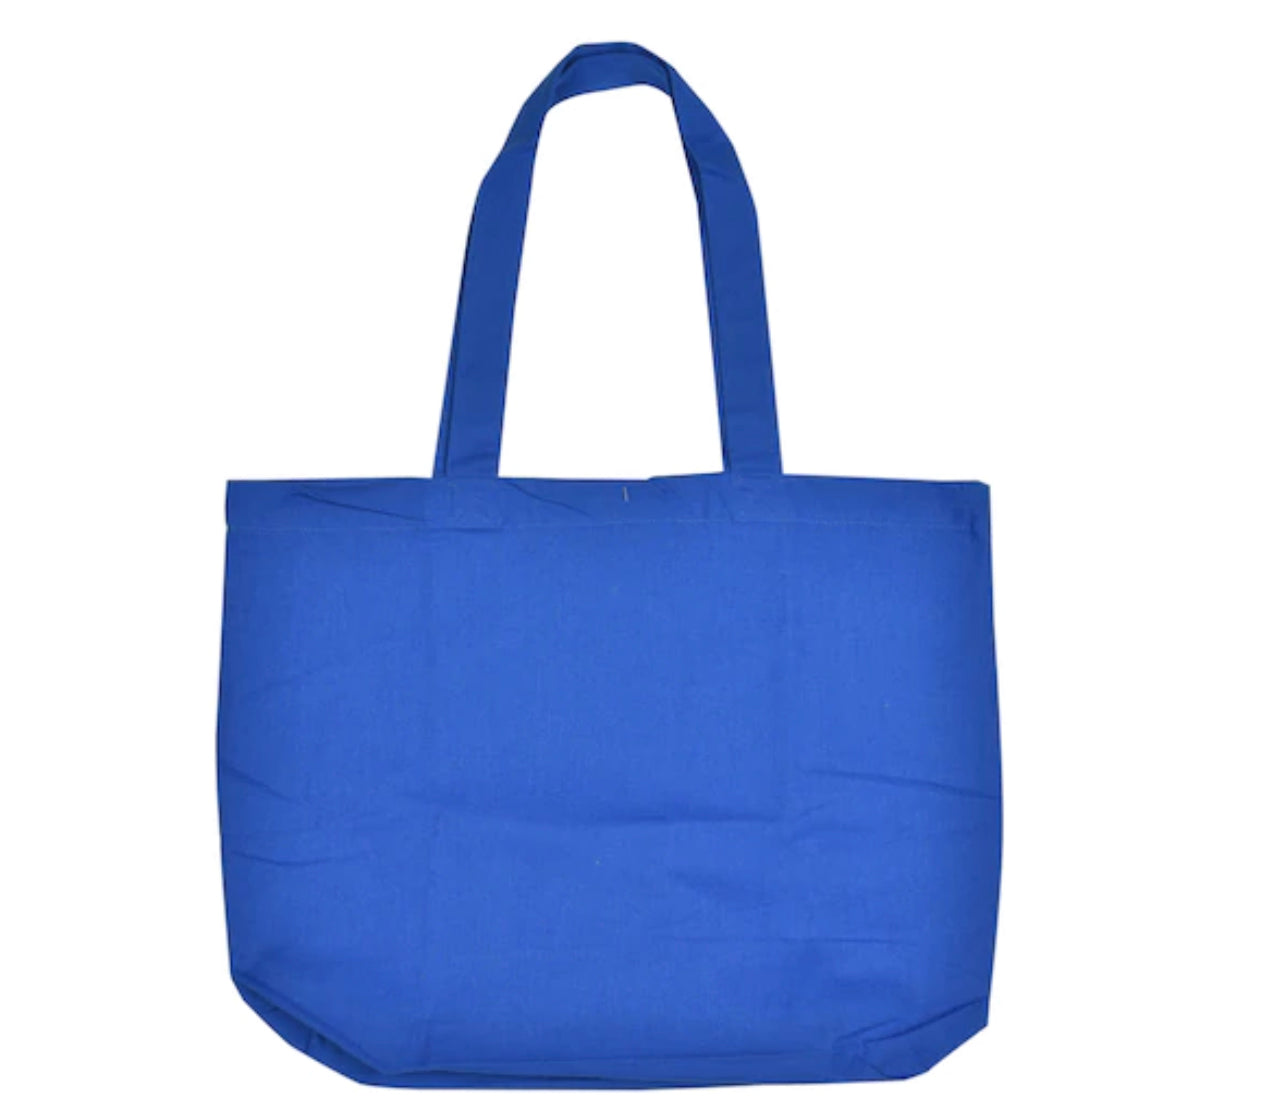 The Svssy Way Tote Bag